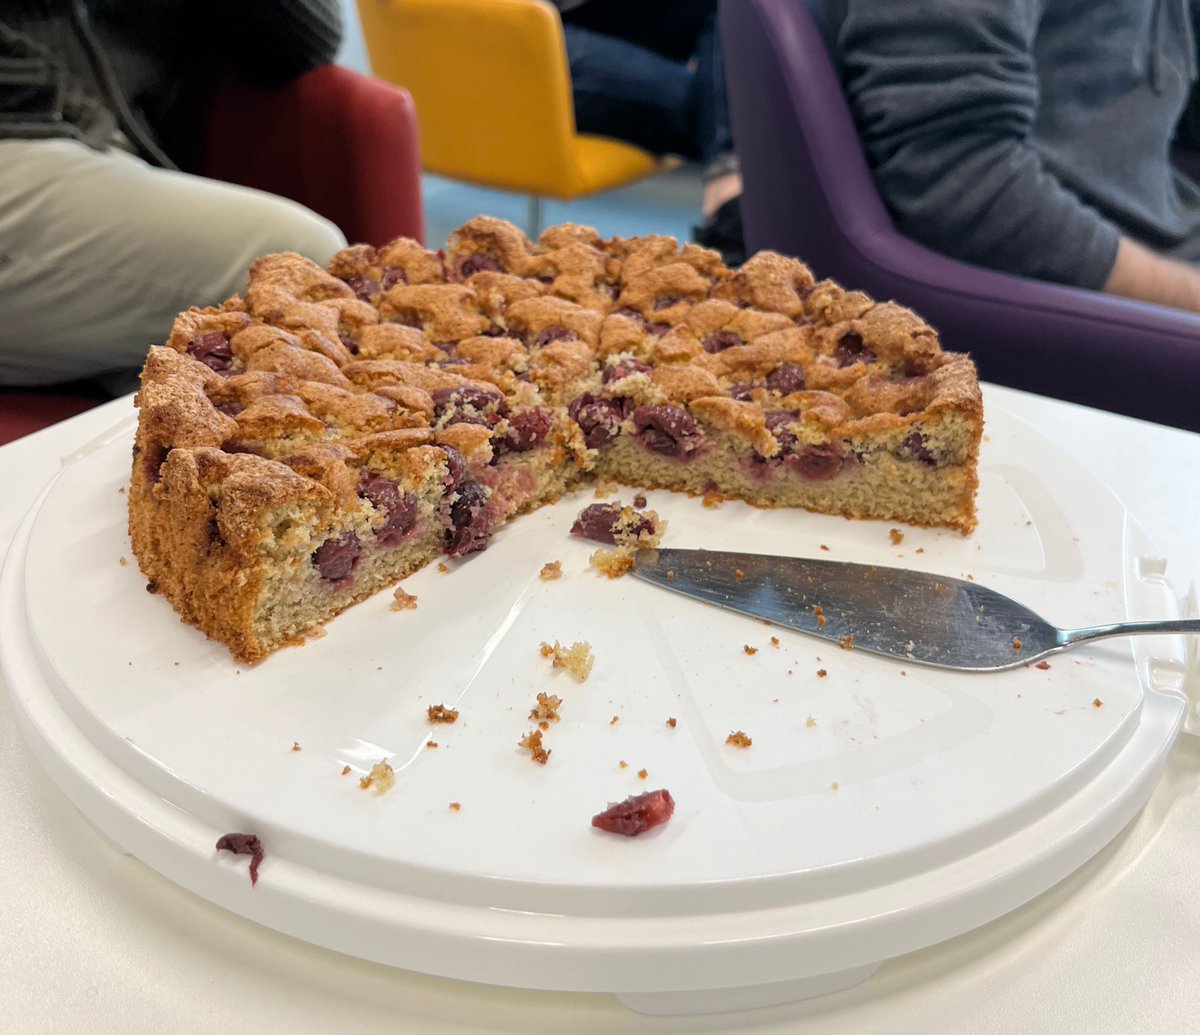 Today our Felix @FAhnefeld presented about reversibility of #quantum processes and the complexity of implementing their inverse when only limited #information is available ✨ Is the inverse physically implementable? The combs are virtual but the cherry cake was very real 🍒